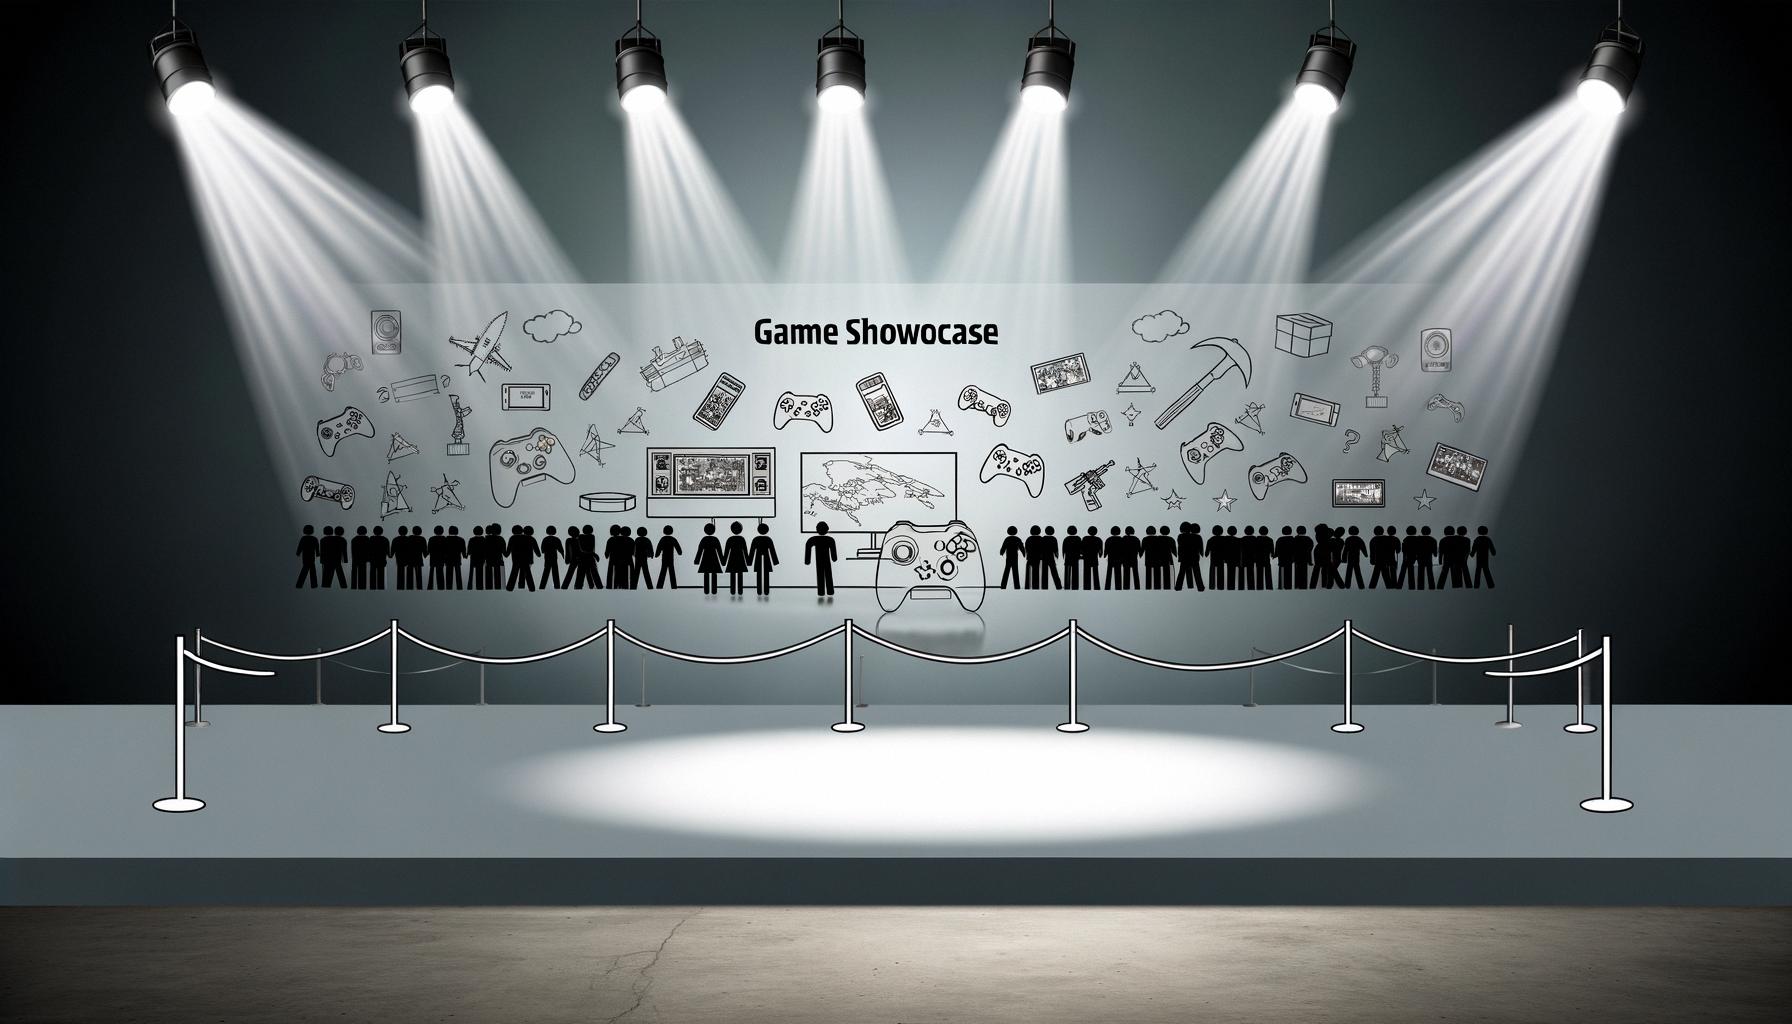 Microsoft's Xbox Games Showcase highlighted major titles and introduced new digital-only consoles.